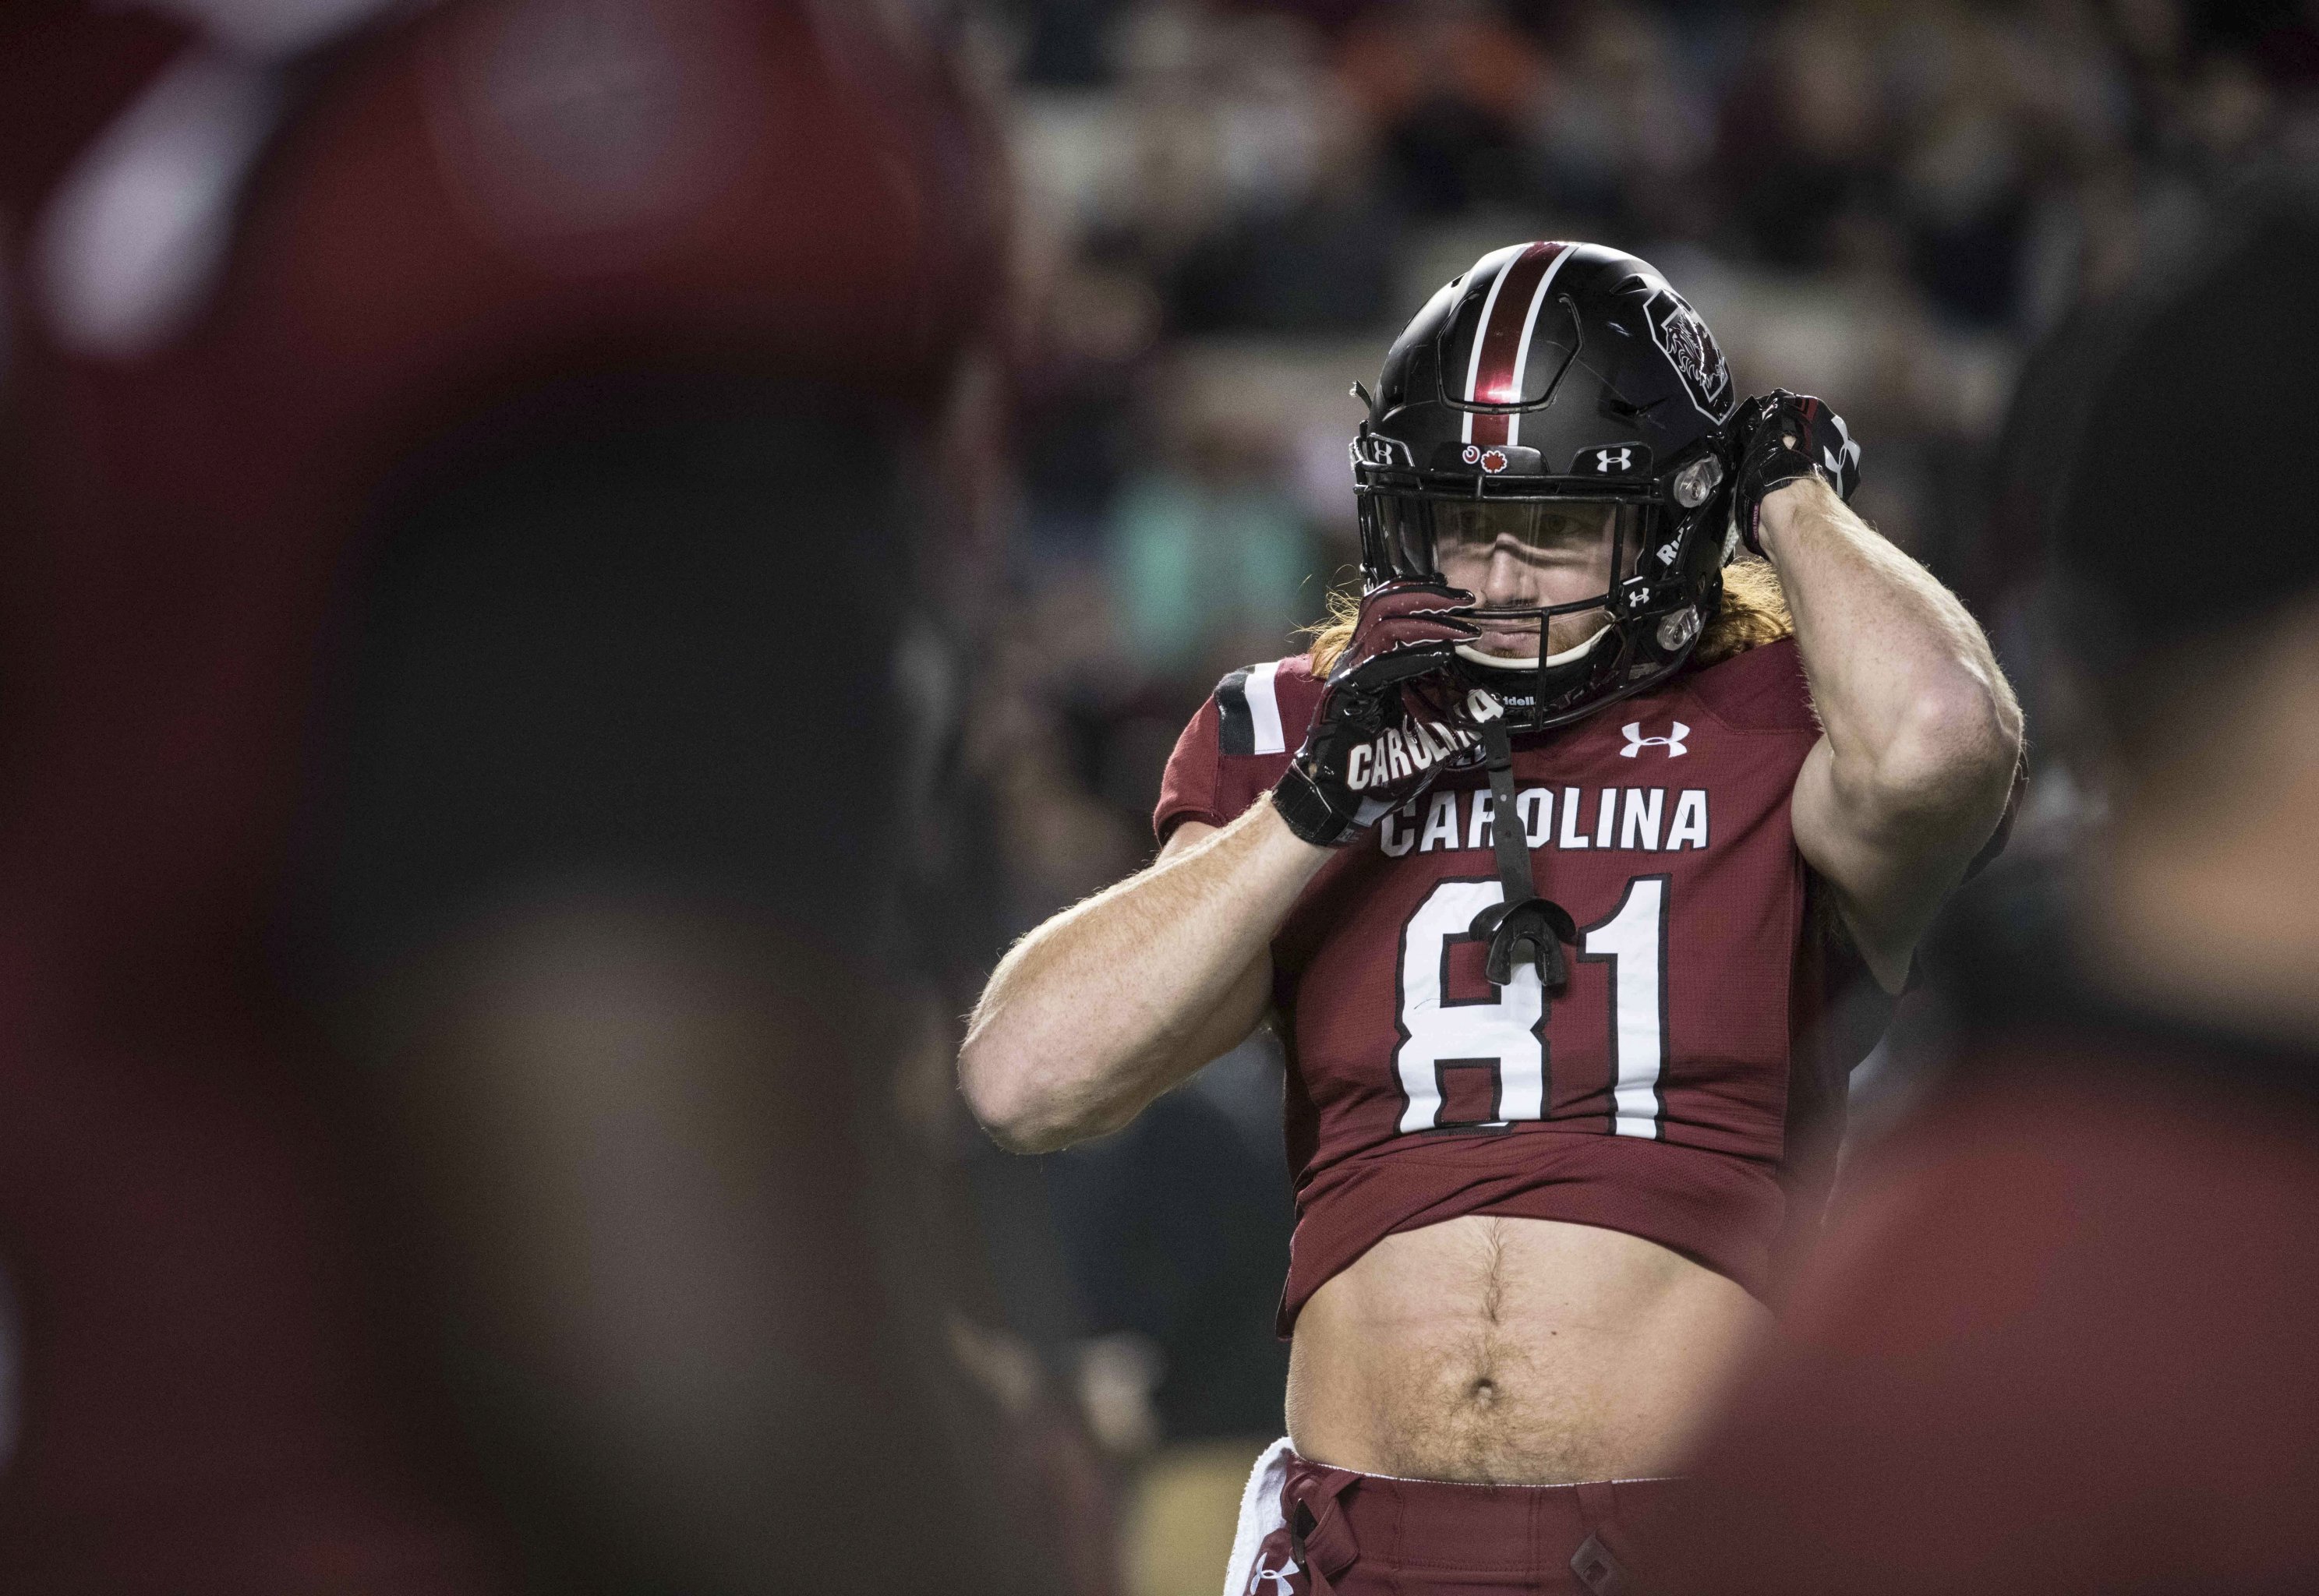 Hayden Hurst: Cincinnati Bengals tight end on his battle with anxiety and  attempt to take his own life, NFL News